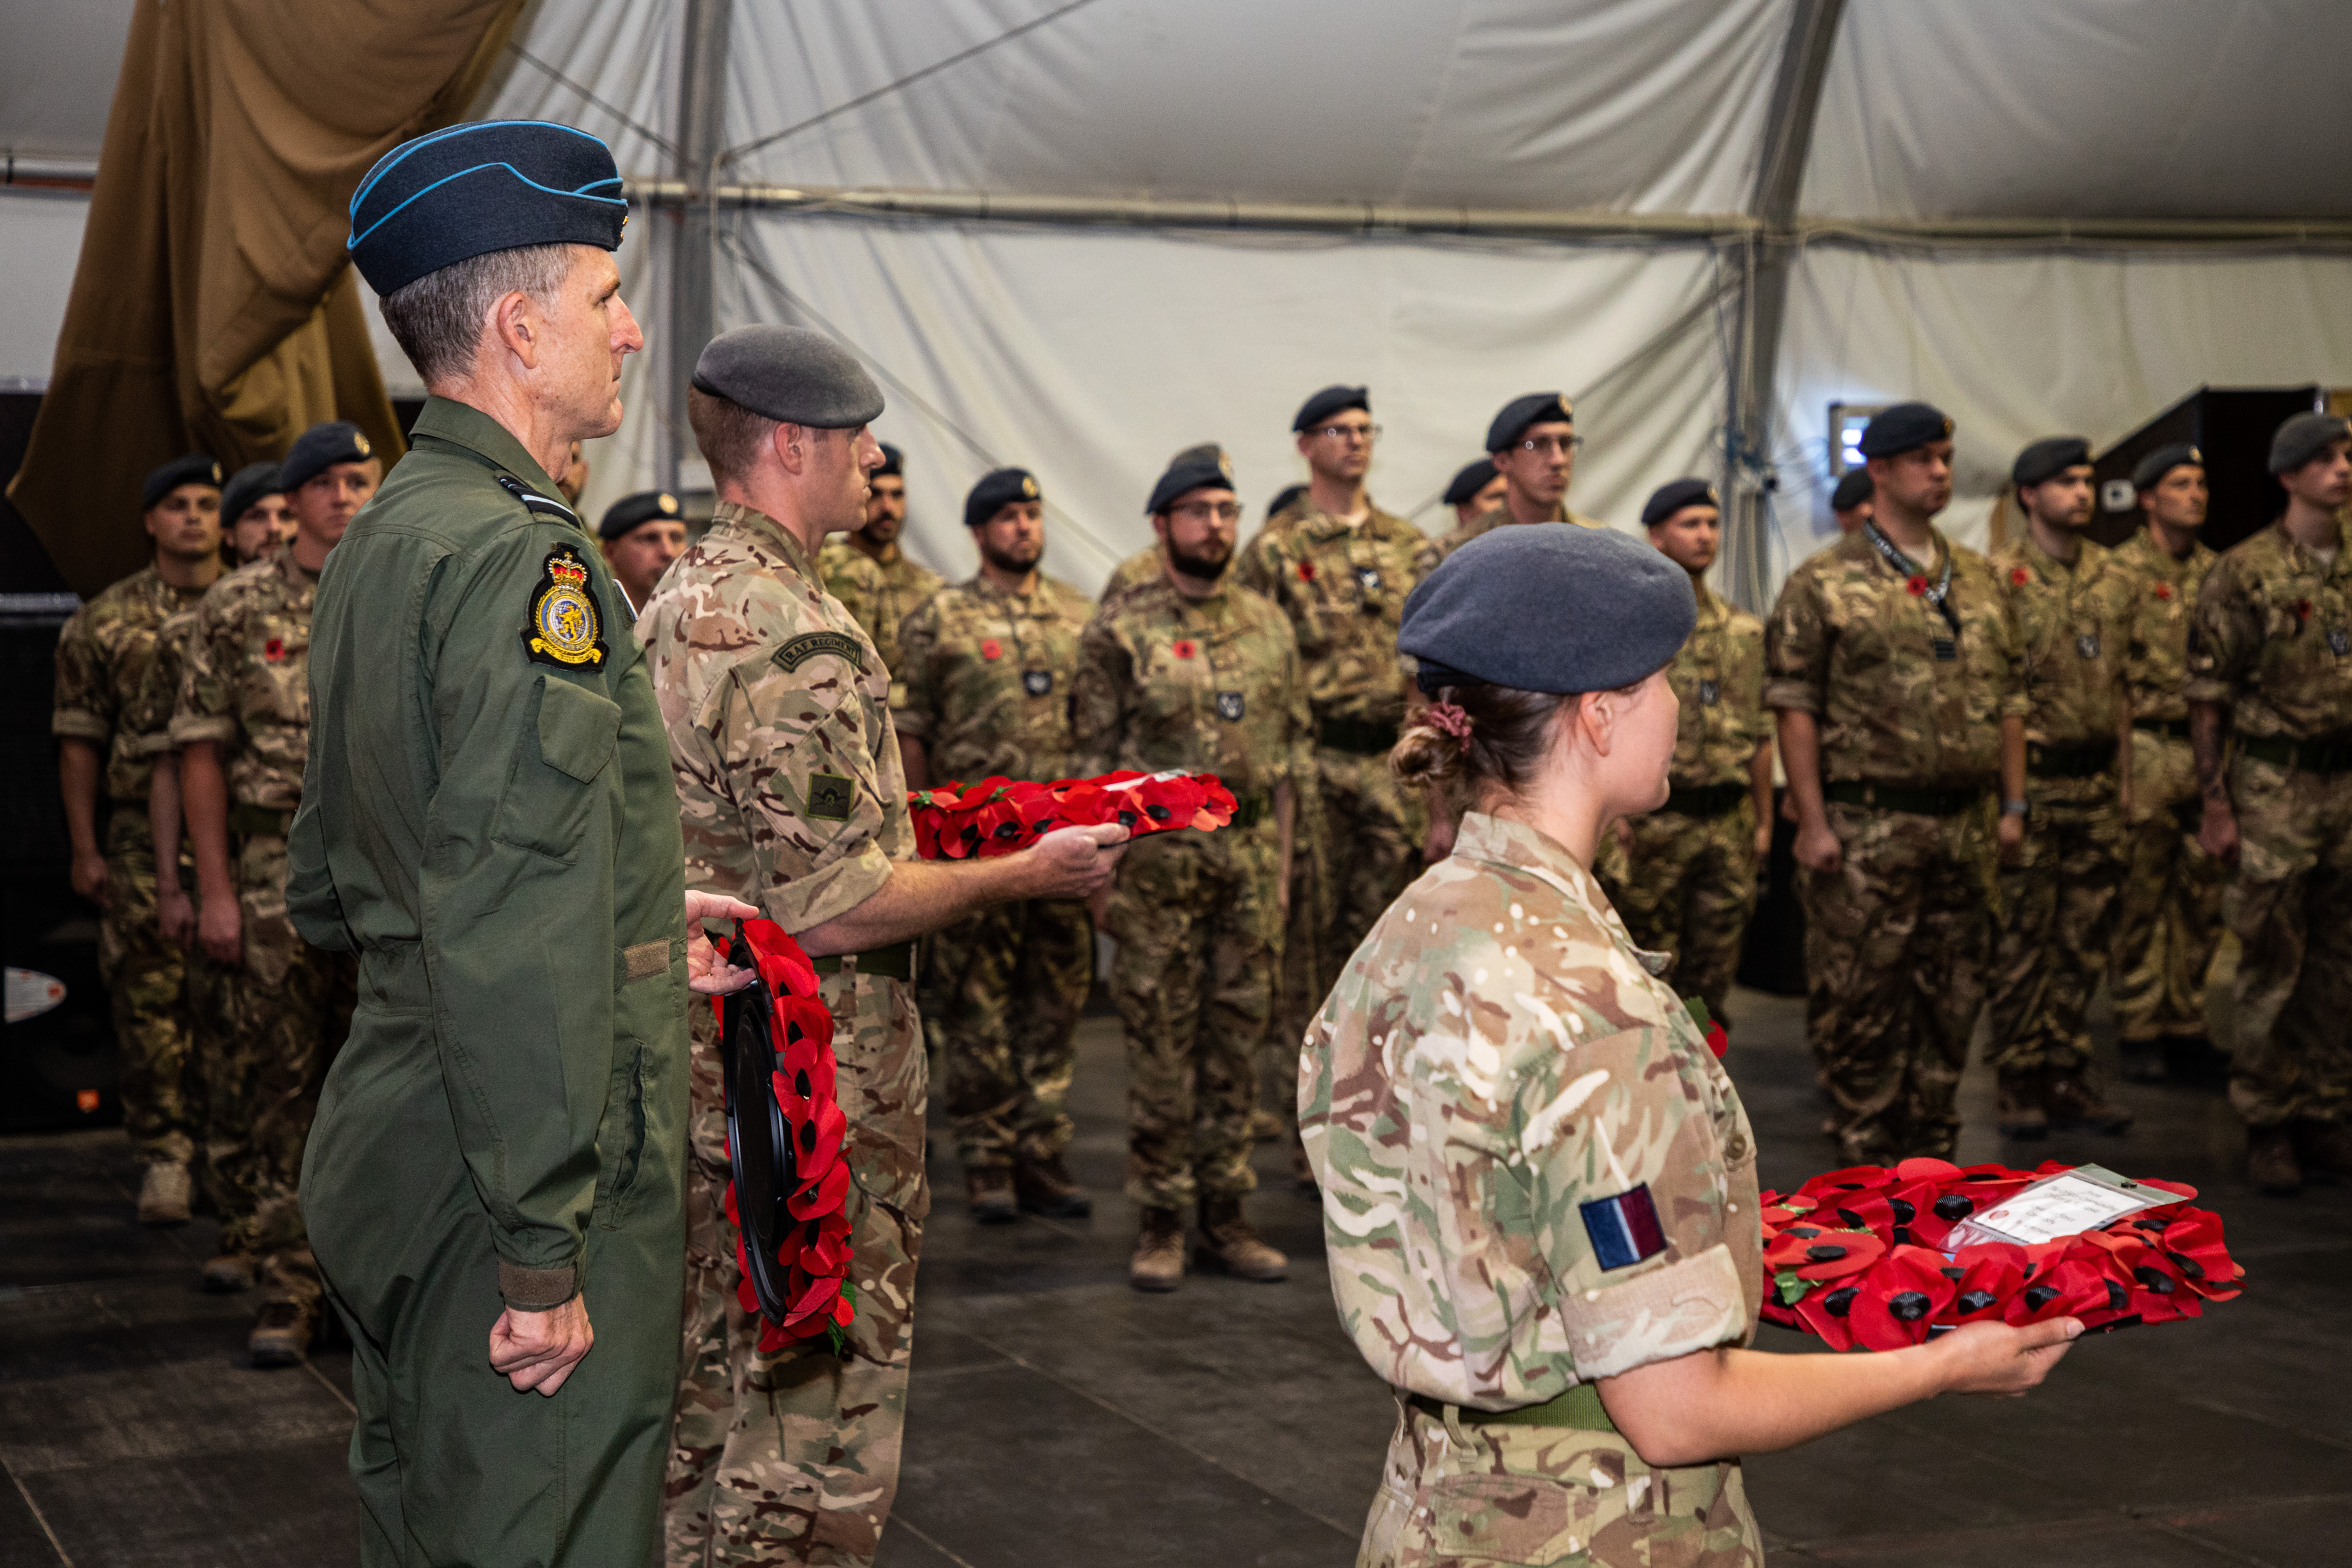 Personnel stand inside tent with three holding poppy wreaths.